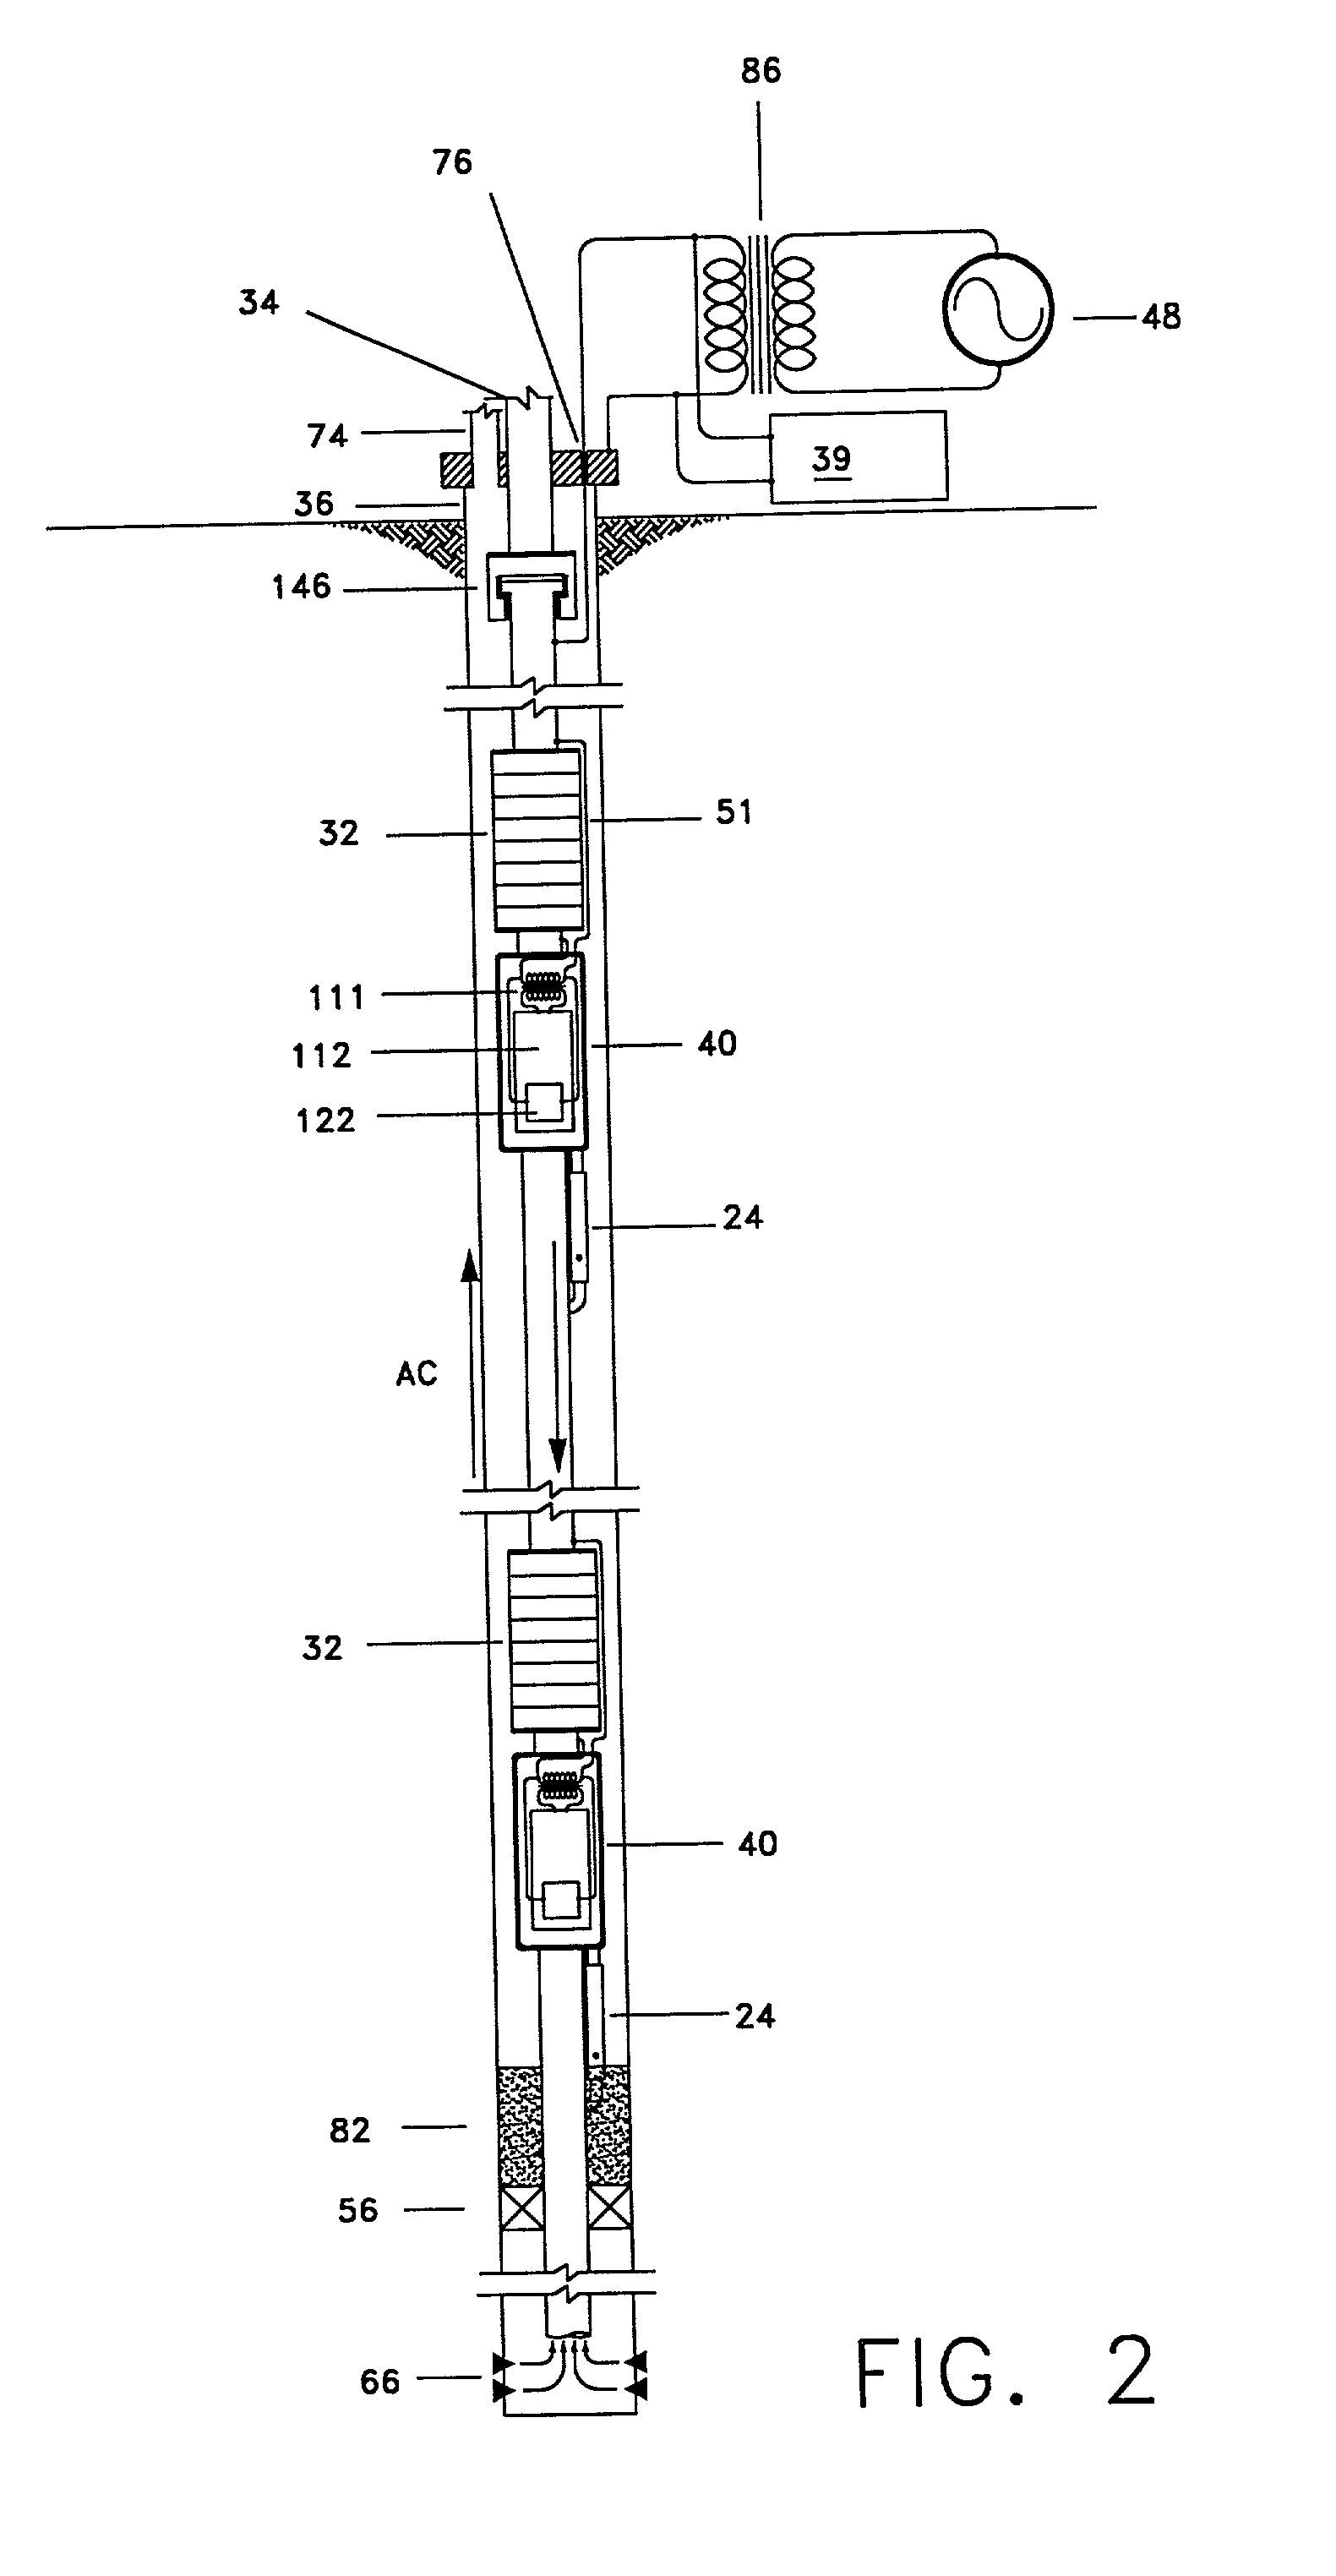 Toroidal choke inductor for wireless communication and control